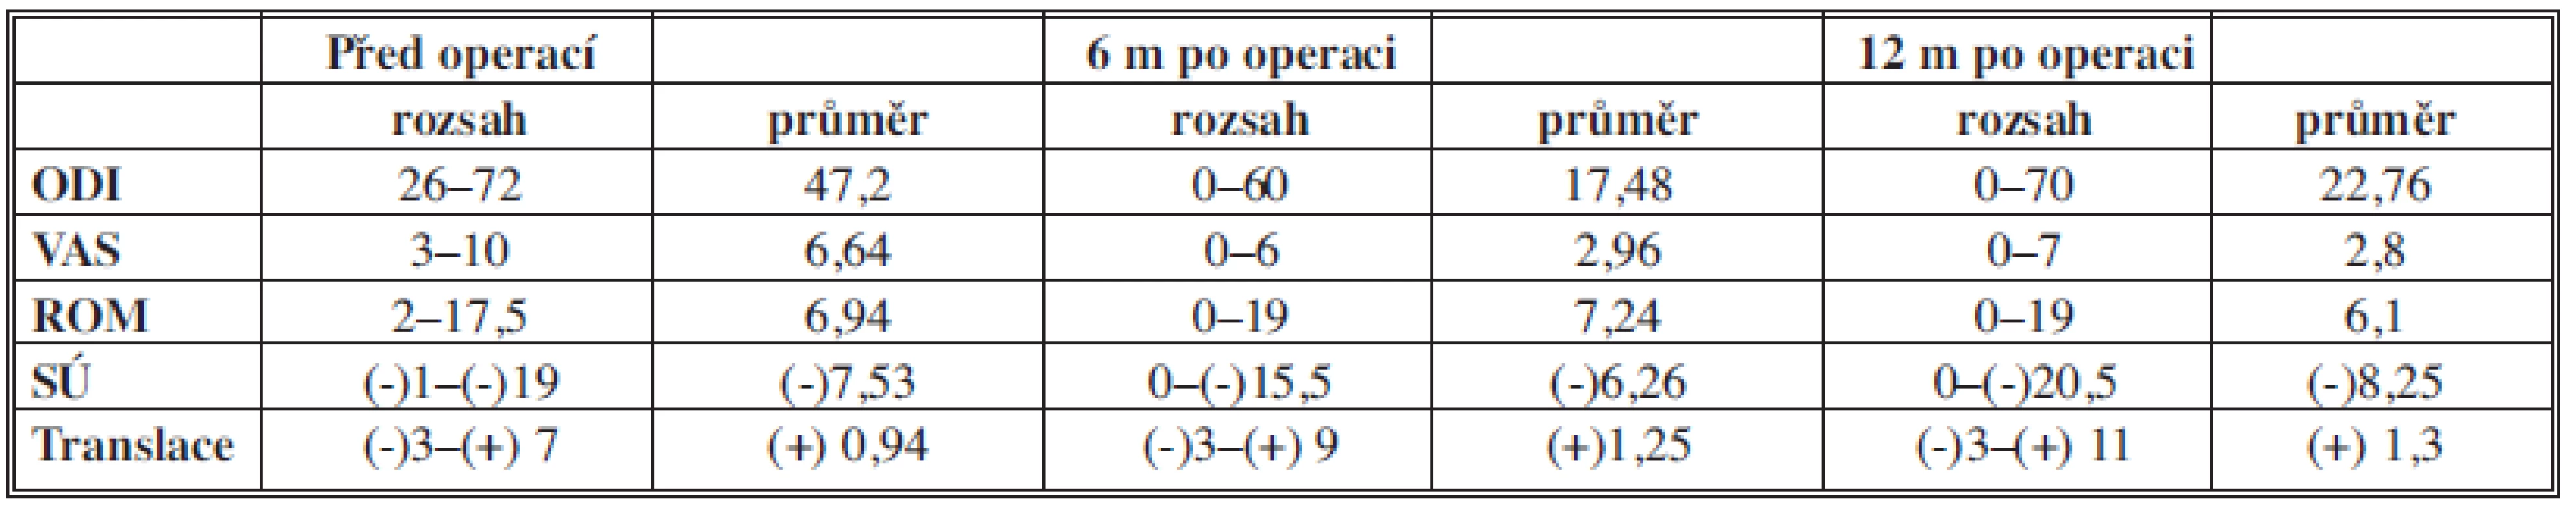 Výsledky klinických a radiologických nálezů před a po operaci
Tab. 1: Results of clinical and radiological findings before and after surgery